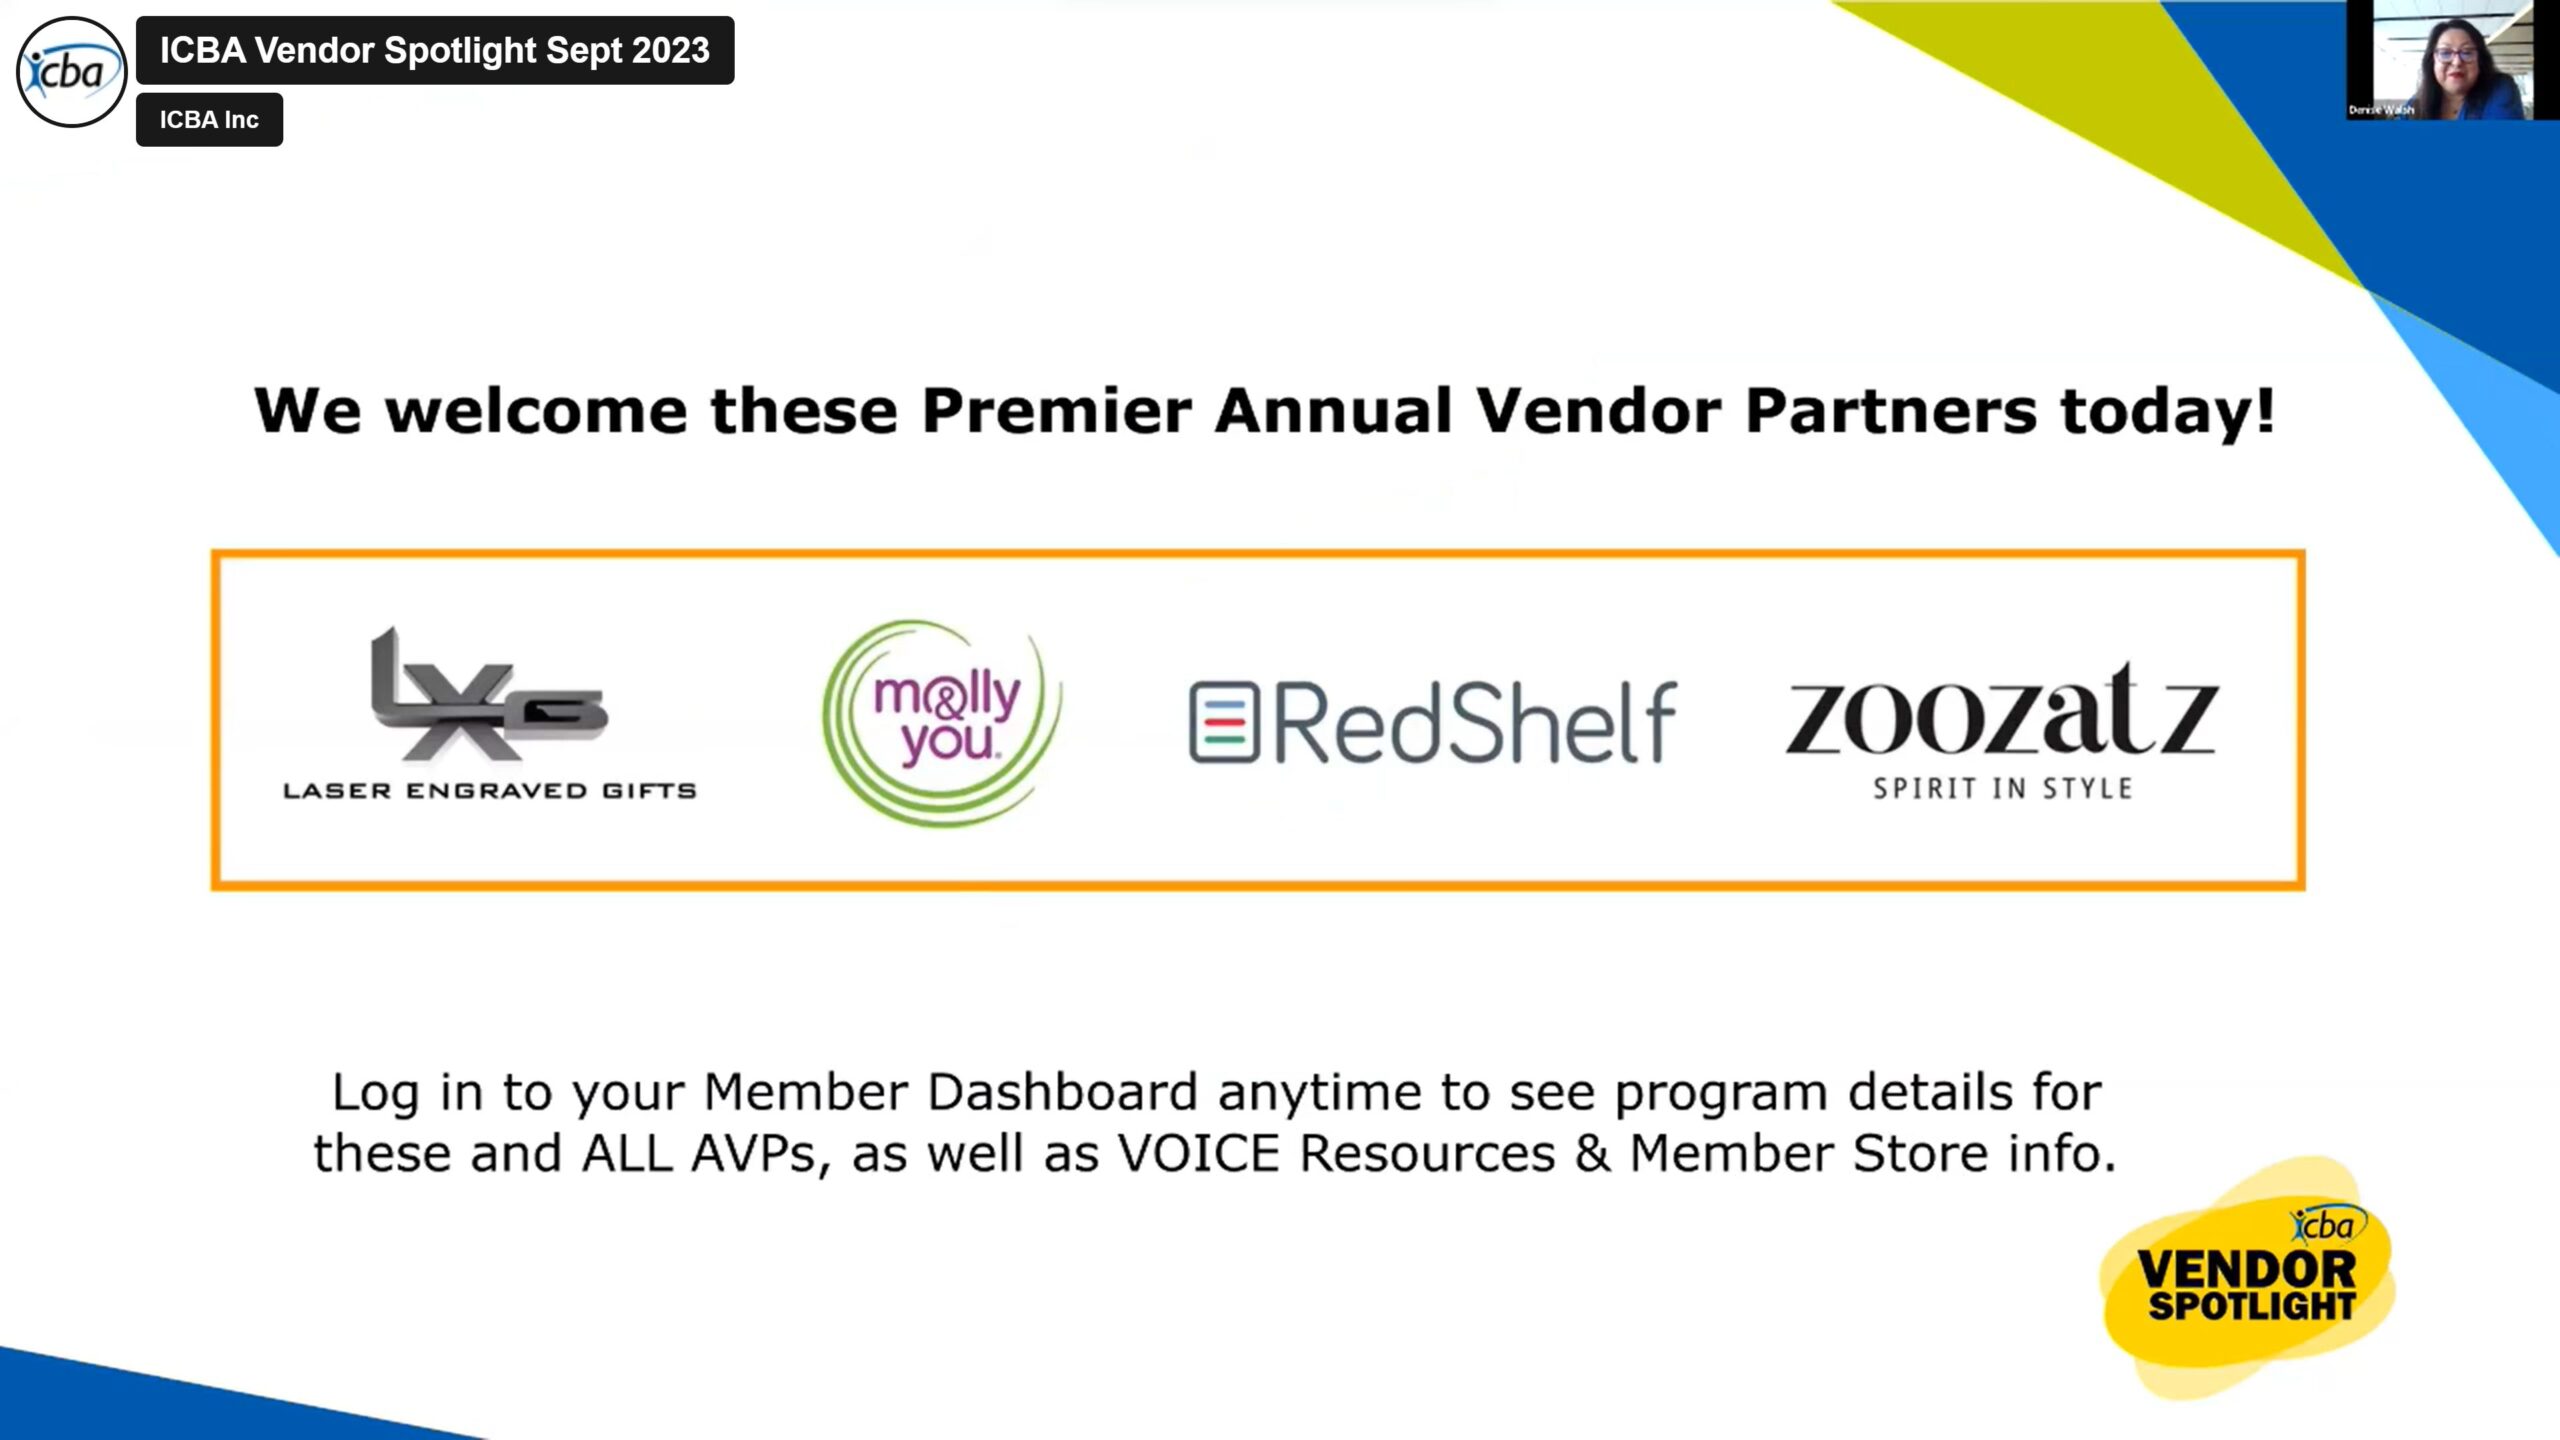 Colorful intro slide features logos for LXG, Zoozatz, Molly&you, and RedShelf, welcoming you to the webinar.